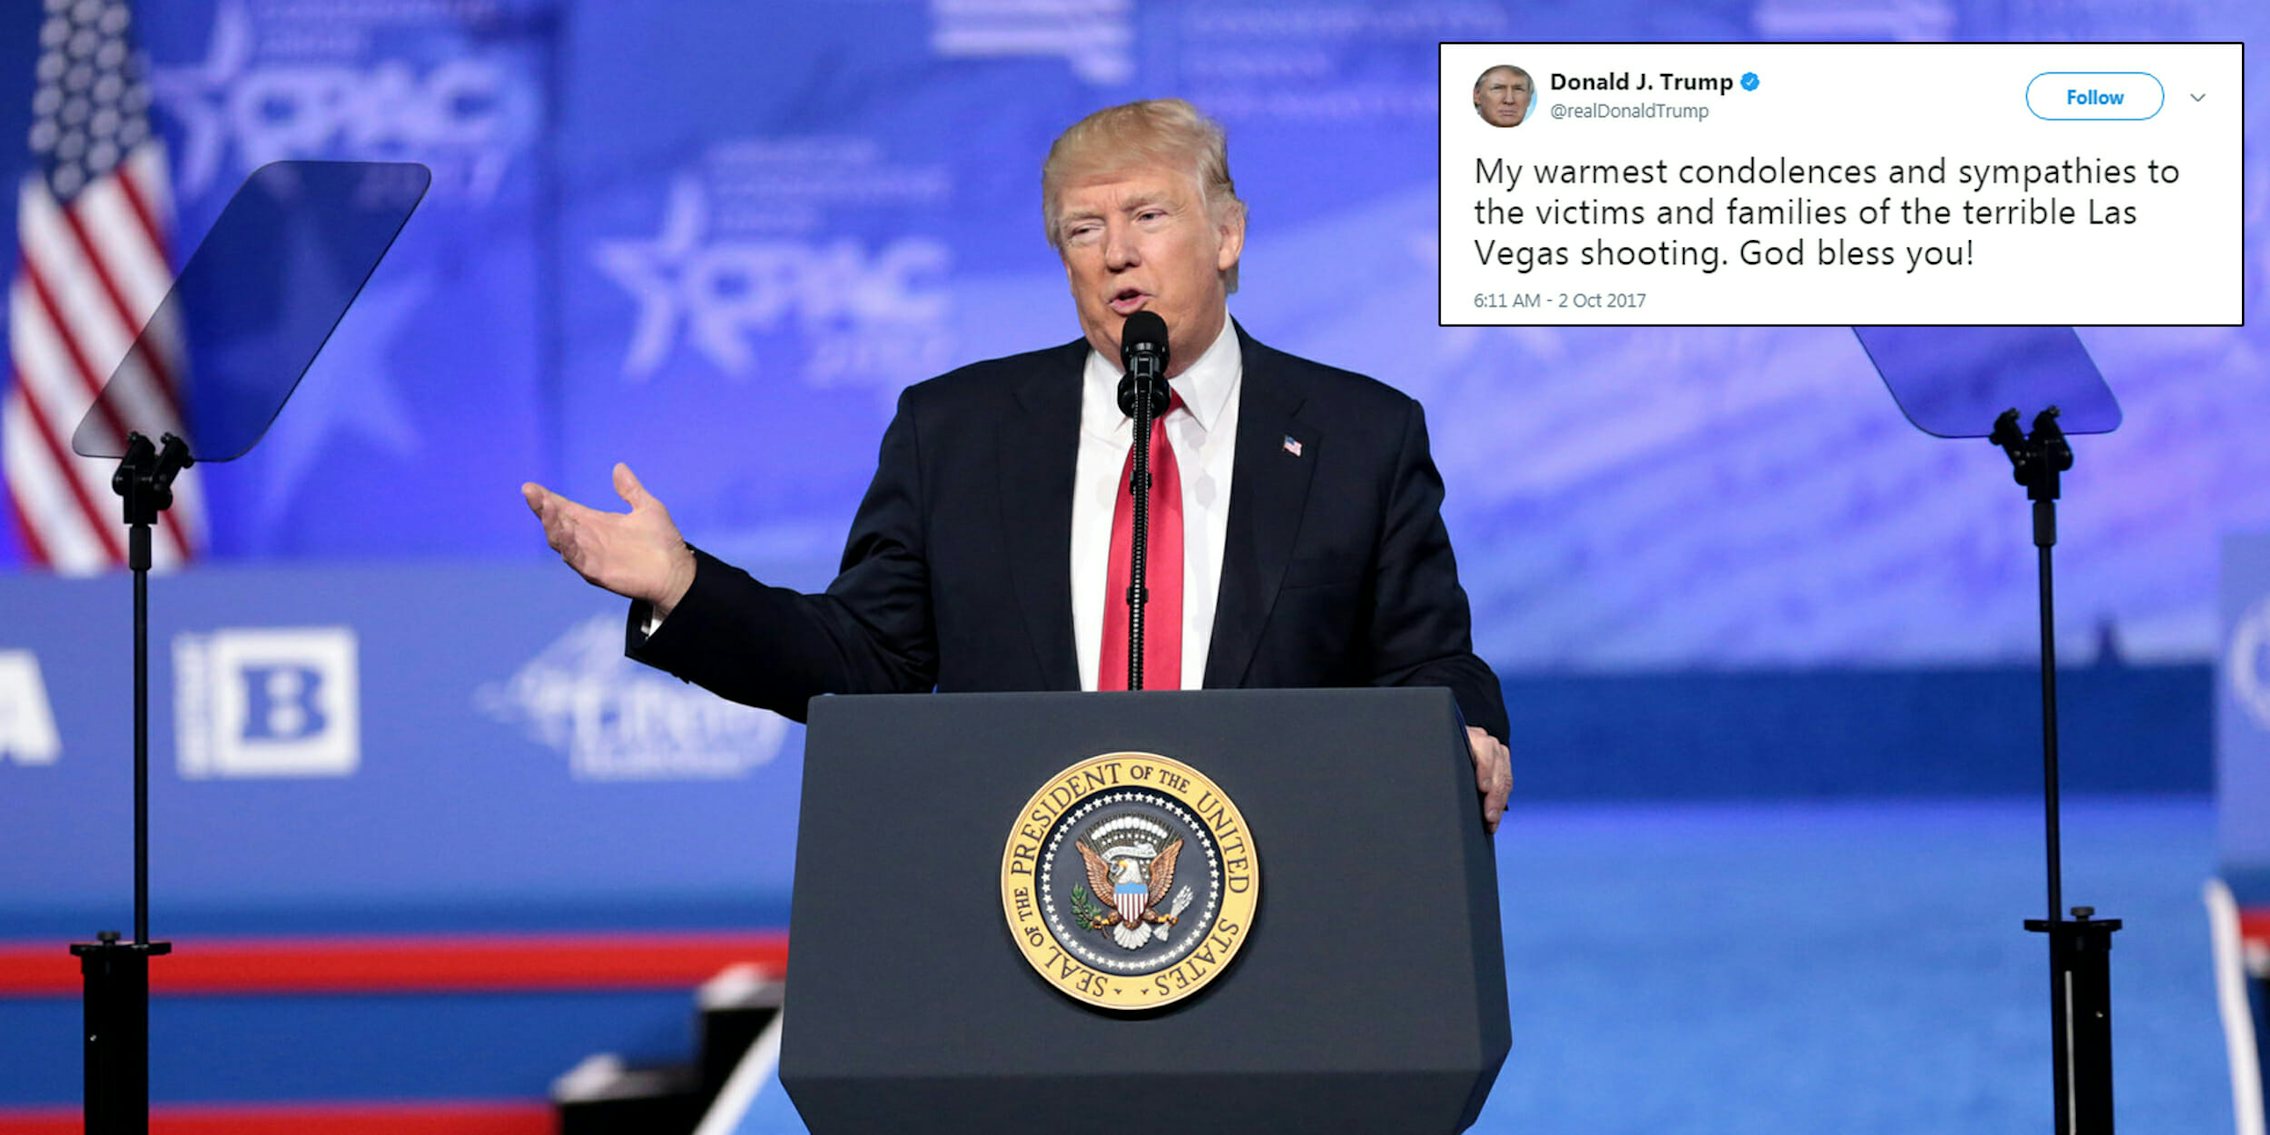 Donald Trump offered his 'warmest condolences' to the victims of the Las Vegas shooting.